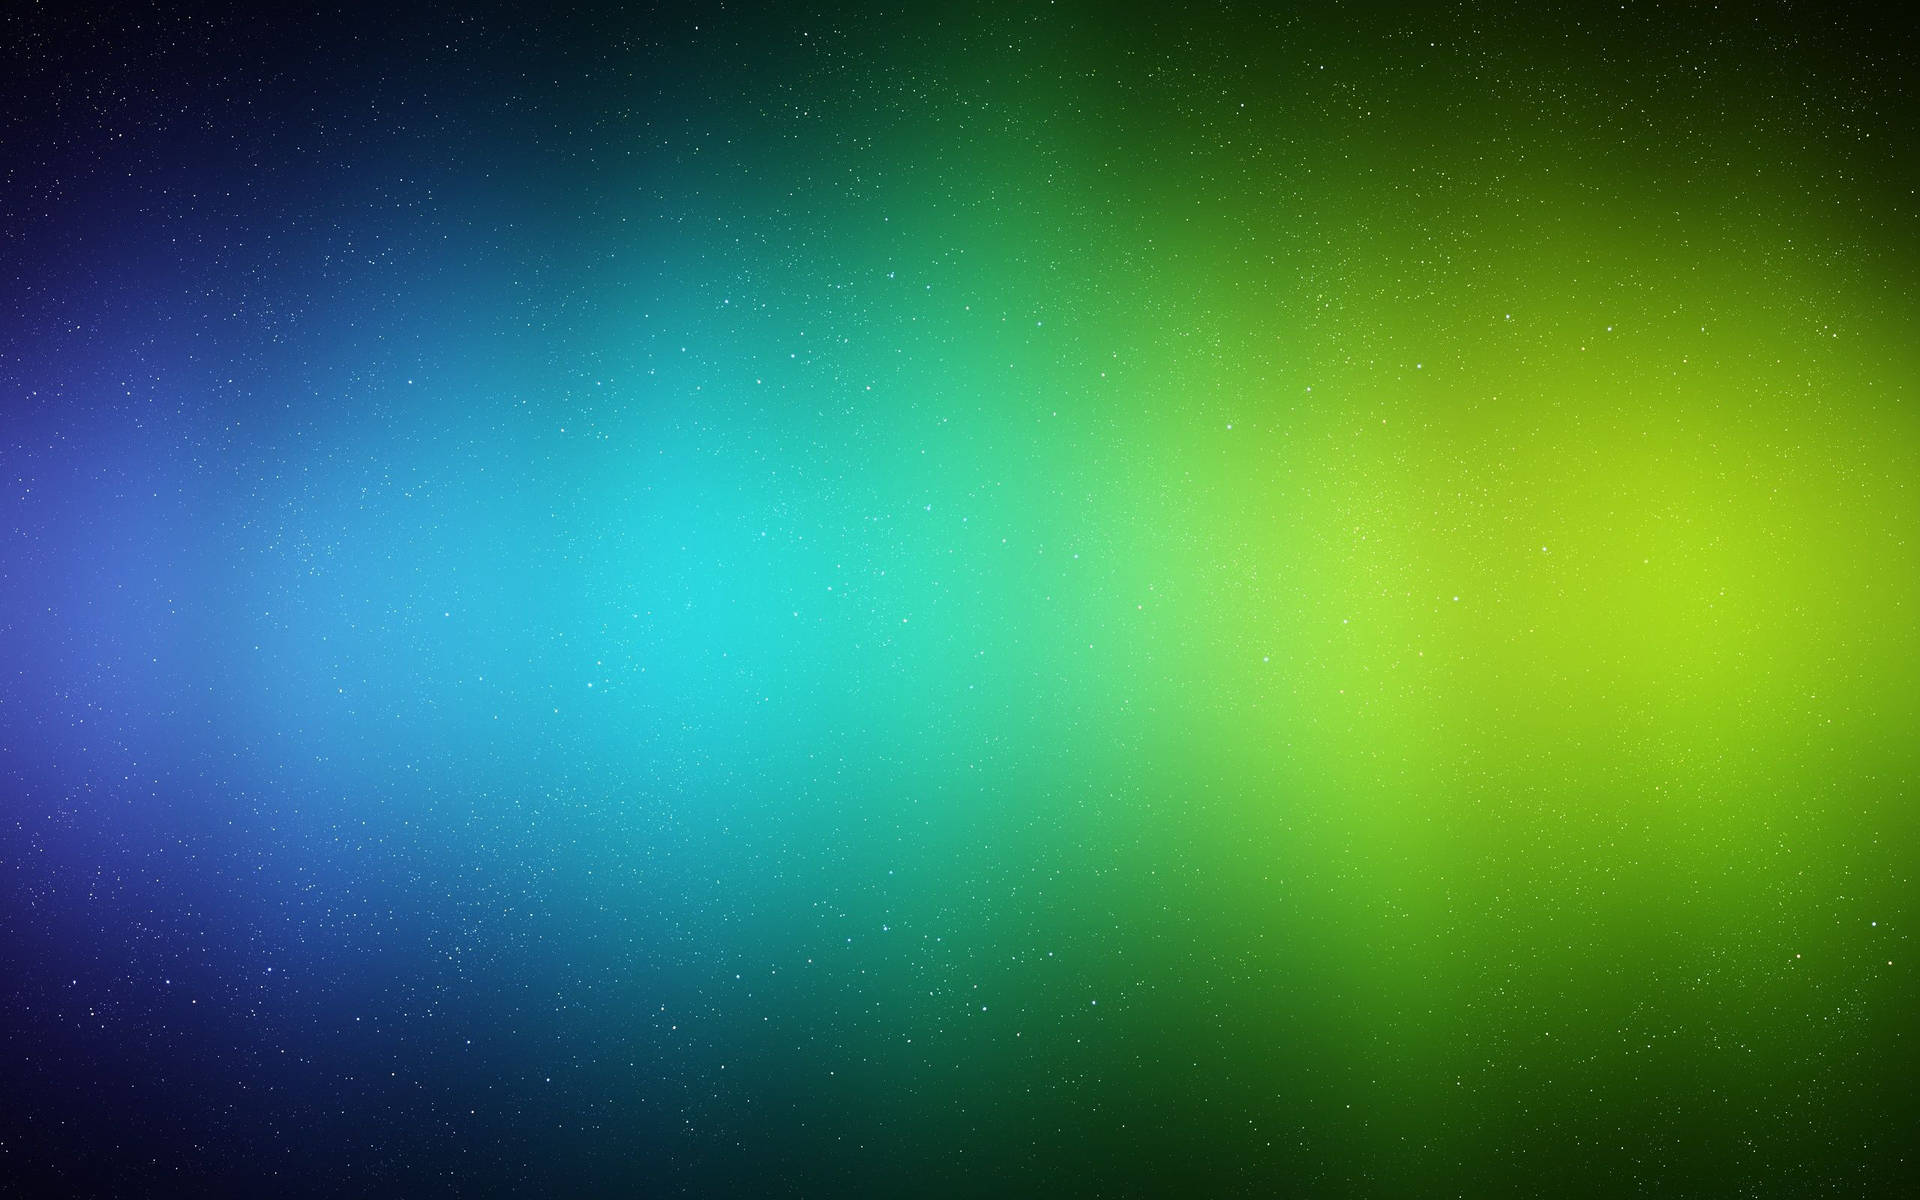 Blue green spectrum with white spots background wallpaper.